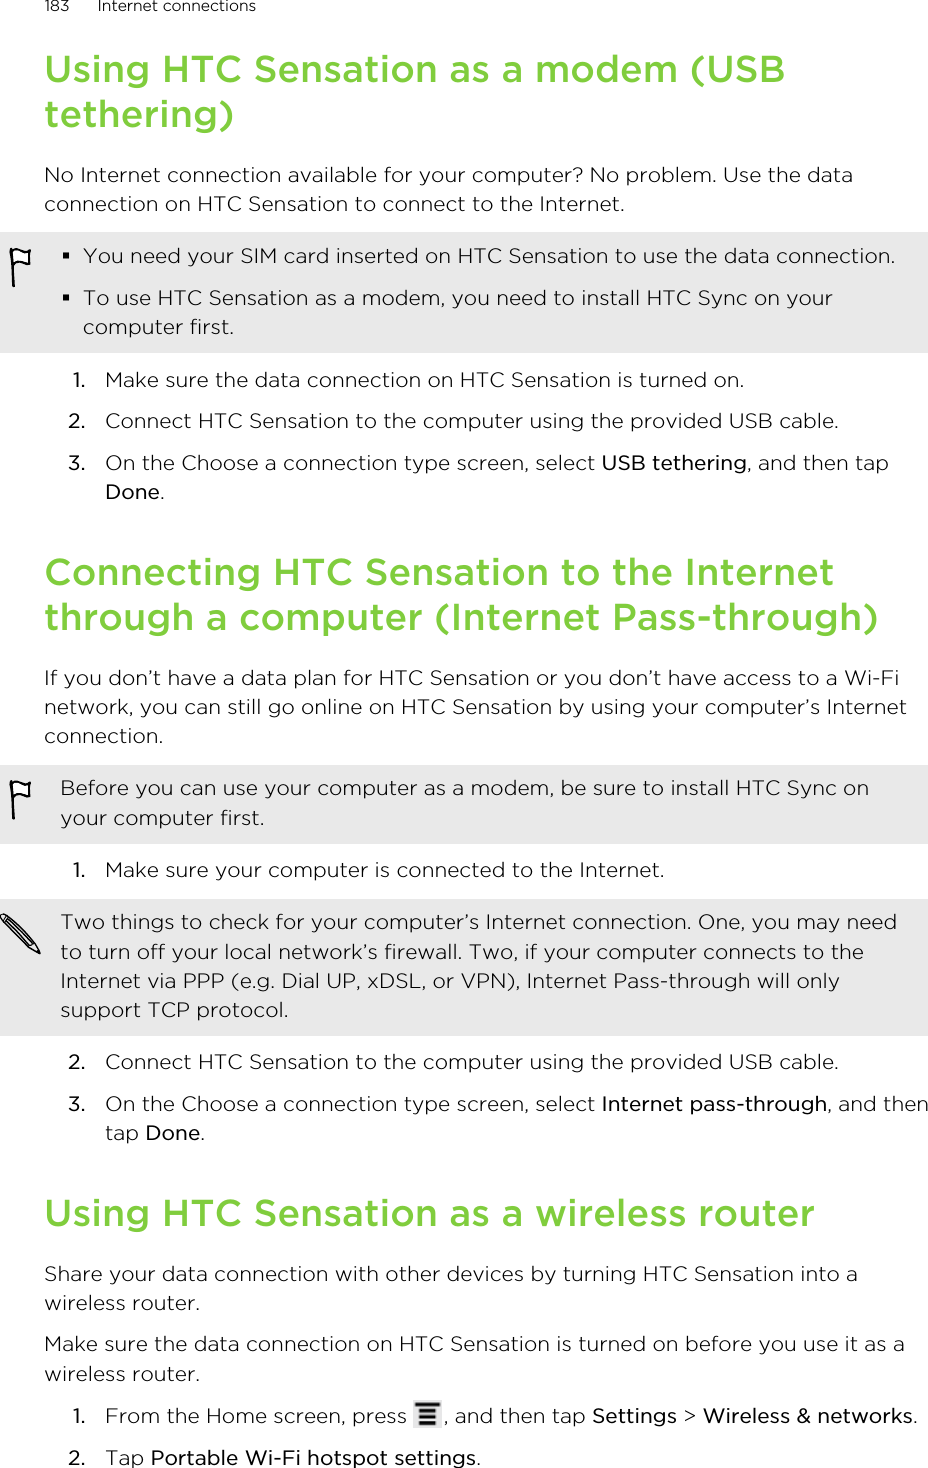 Using HTC Sensation as a modem (USBtethering)No Internet connection available for your computer? No problem. Use the dataconnection on HTC Sensation to connect to the Internet.§You need your SIM card inserted on HTC Sensation to use the data connection.§To use HTC Sensation as a modem, you need to install HTC Sync on yourcomputer first.1. Make sure the data connection on HTC Sensation is turned on.2. Connect HTC Sensation to the computer using the provided USB cable.3. On the Choose a connection type screen, select USB tethering, and then tapDone.Connecting HTC Sensation to the Internetthrough a computer (Internet Pass-through)If you don’t have a data plan for HTC Sensation or you don’t have access to a Wi-Finetwork, you can still go online on HTC Sensation by using your computer’s Internetconnection.Before you can use your computer as a modem, be sure to install HTC Sync onyour computer first.1. Make sure your computer is connected to the Internet. Two things to check for your computer’s Internet connection. One, you may needto turn off your local network’s firewall. Two, if your computer connects to theInternet via PPP (e.g. Dial UP, xDSL, or VPN), Internet Pass-through will onlysupport TCP protocol.2. Connect HTC Sensation to the computer using the provided USB cable.3. On the Choose a connection type screen, select Internet pass-through, and thentap Done.Using HTC Sensation as a wireless routerShare your data connection with other devices by turning HTC Sensation into awireless router.Make sure the data connection on HTC Sensation is turned on before you use it as awireless router.1. From the Home screen, press  , and then tap Settings &gt; Wireless &amp; networks.2. Tap Portable Wi-Fi hotspot settings.183 Internet connections